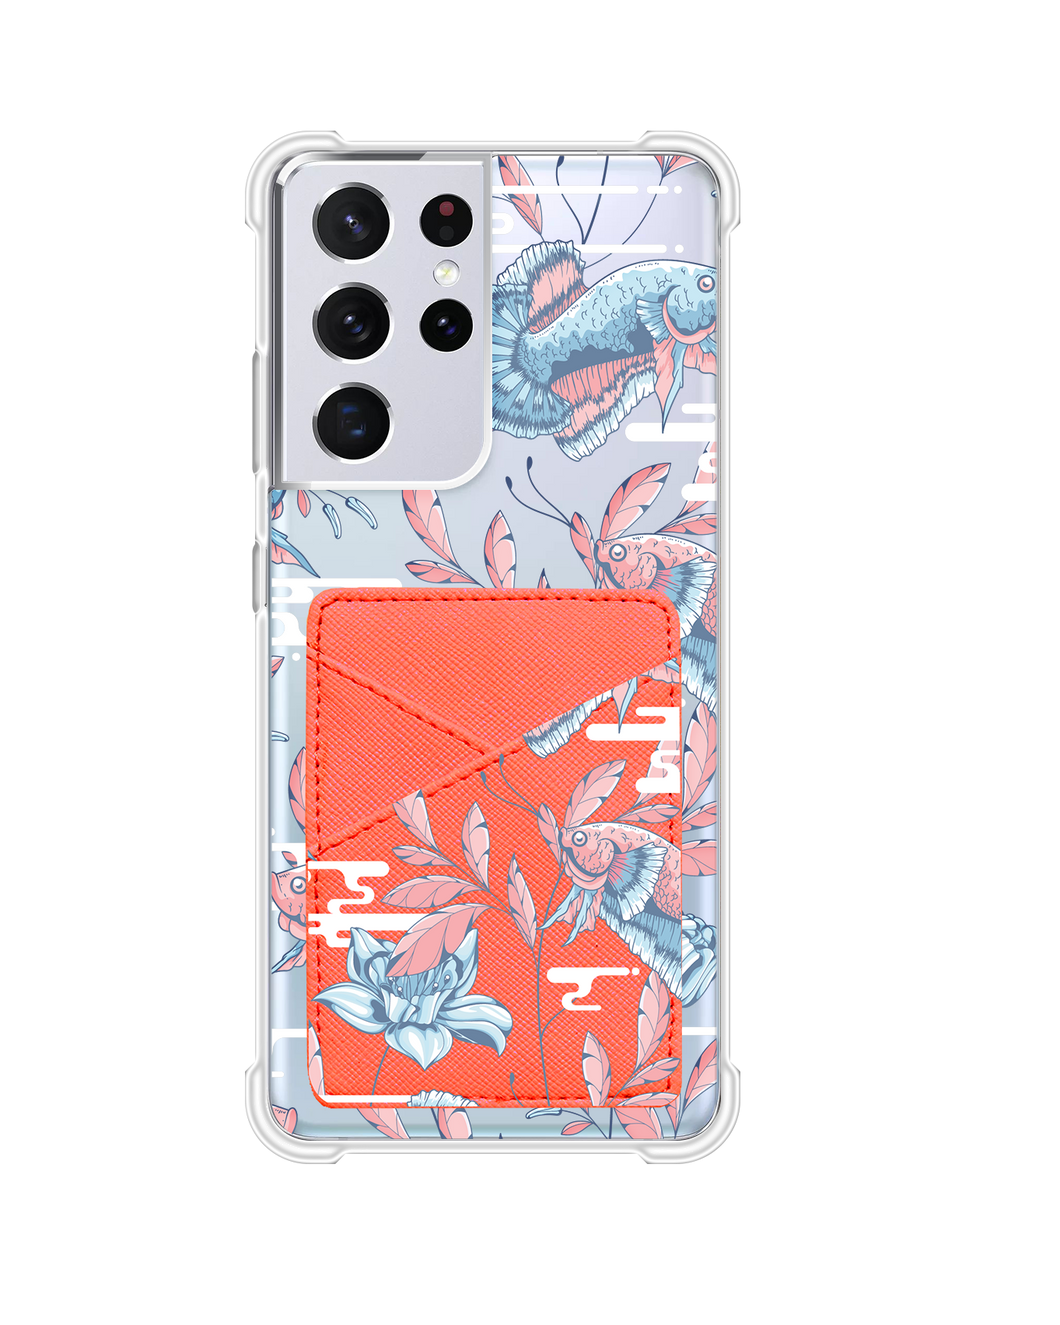 Android Phone Wallet Case - Fish & Floral 3.0